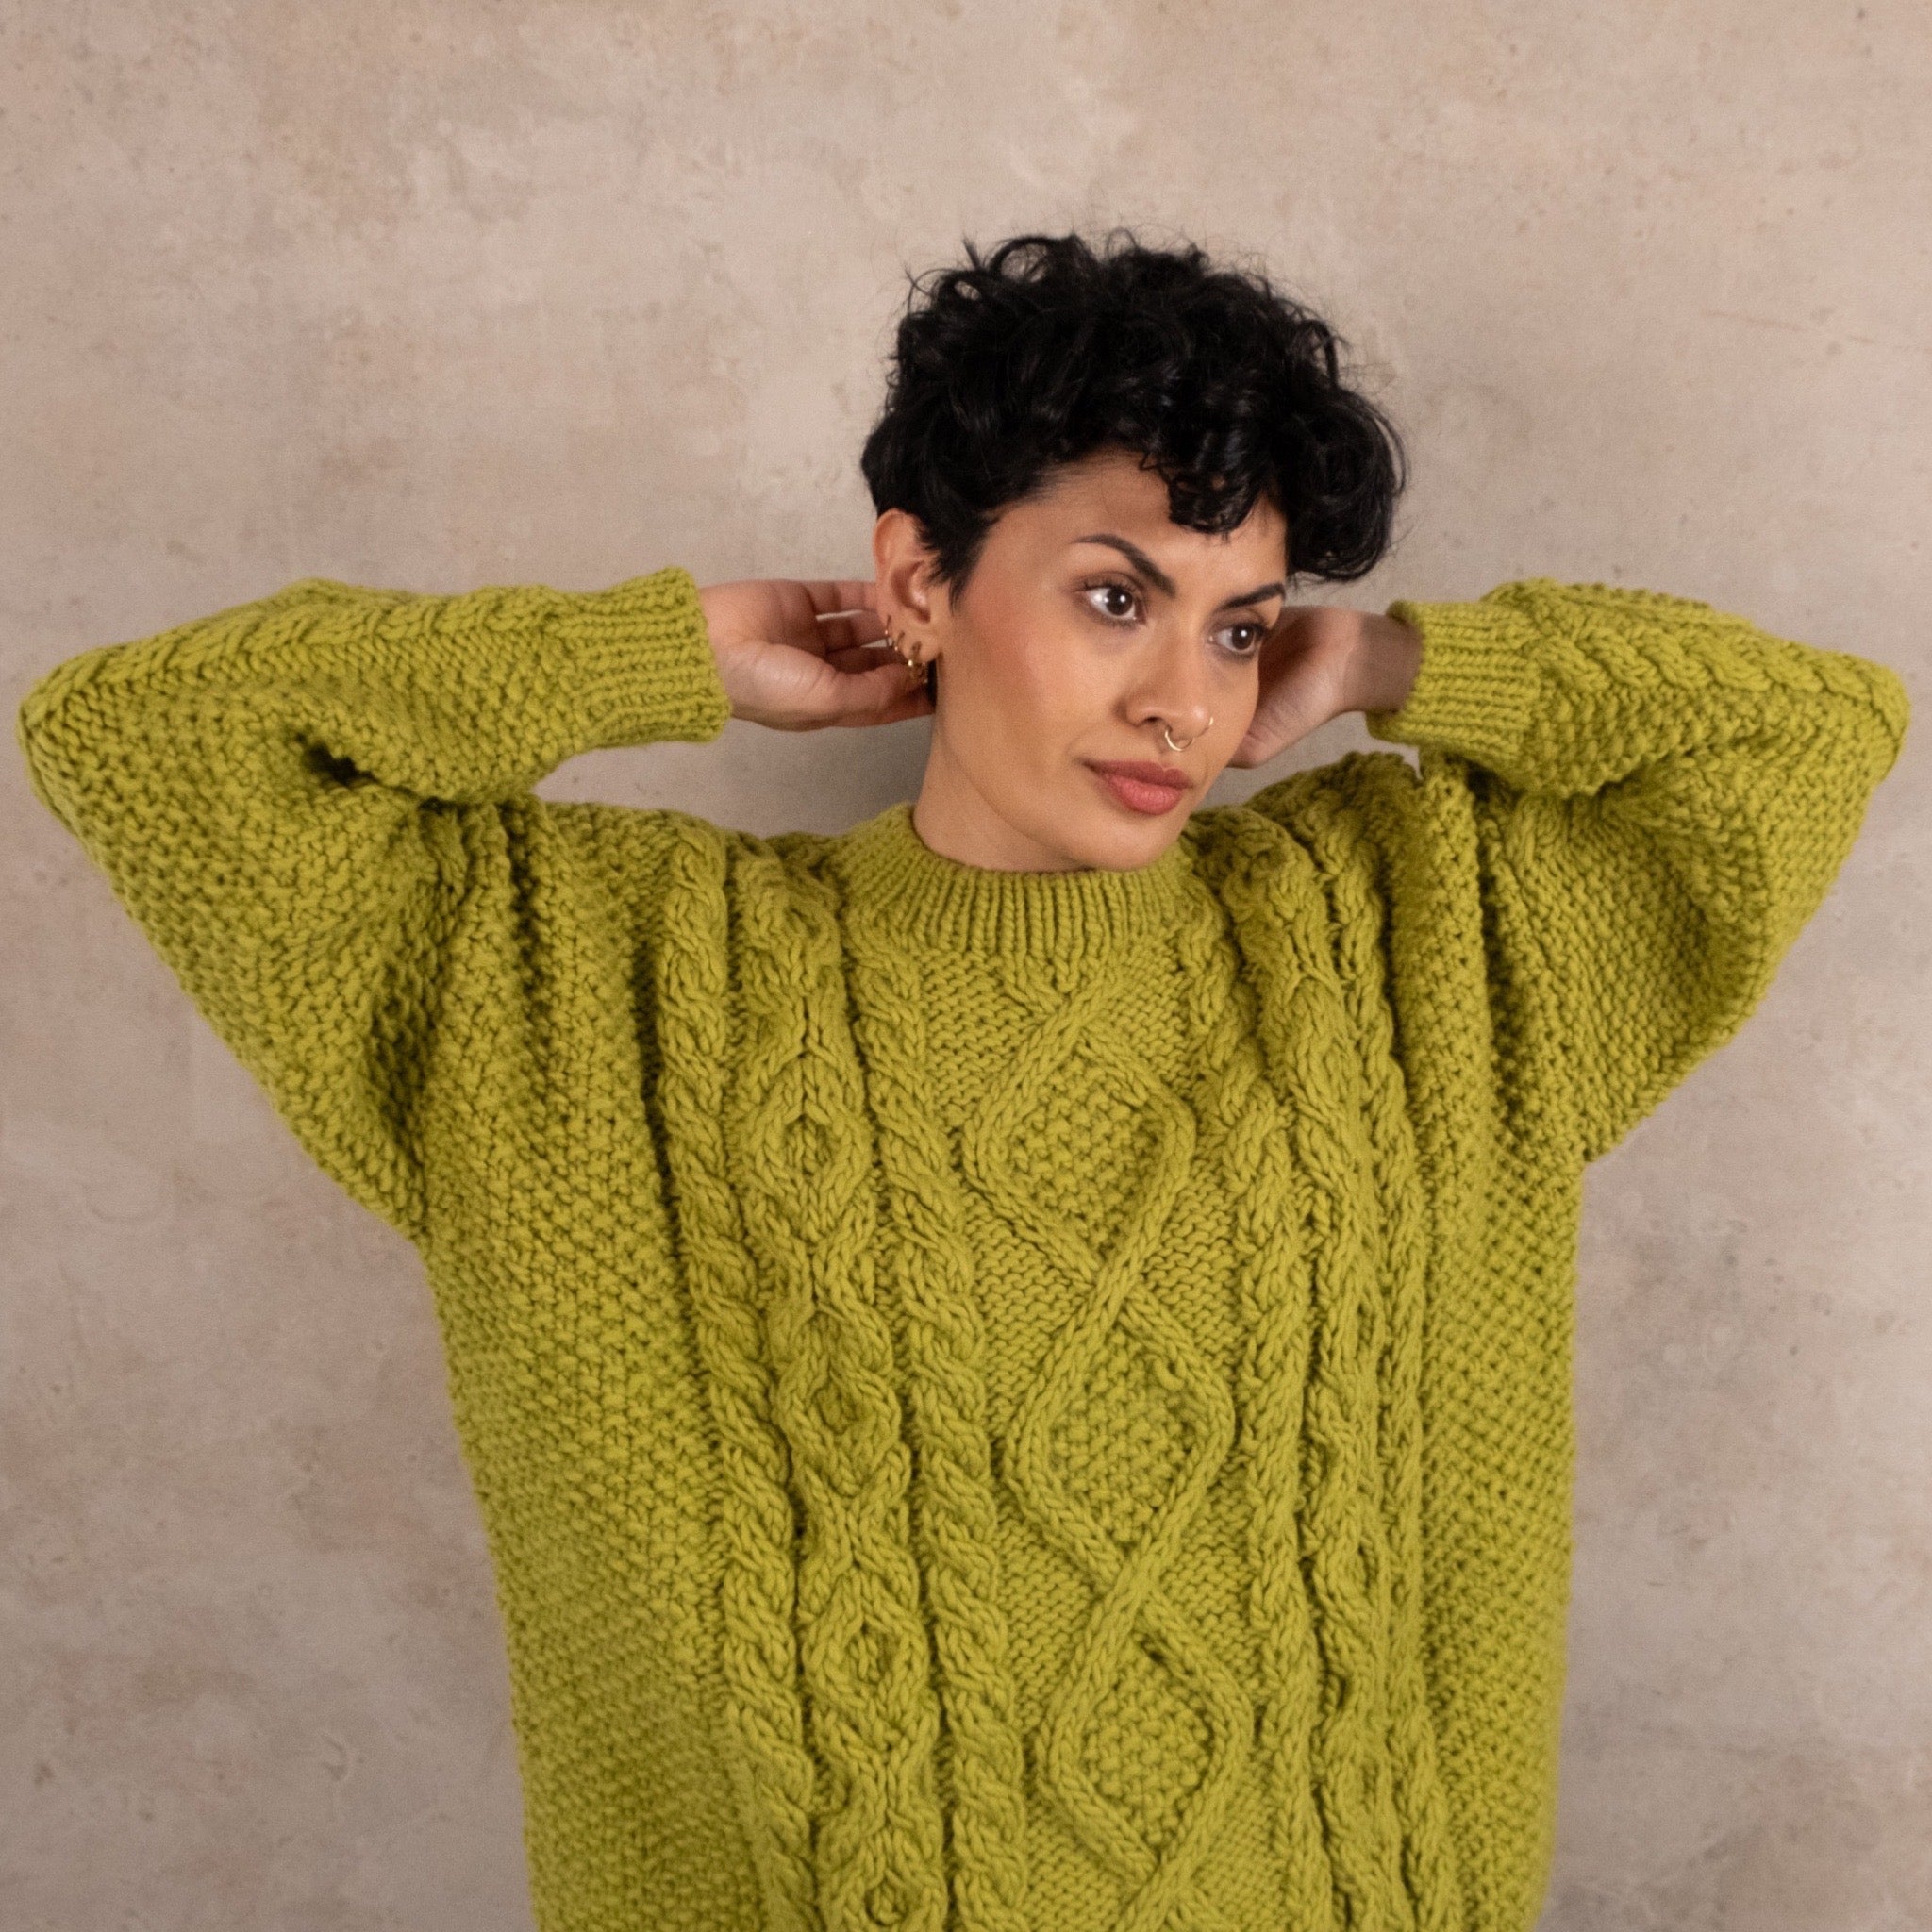 Ichi Antiquités Peruvian Hand Knitted Pistachio Cable Wool Sweater